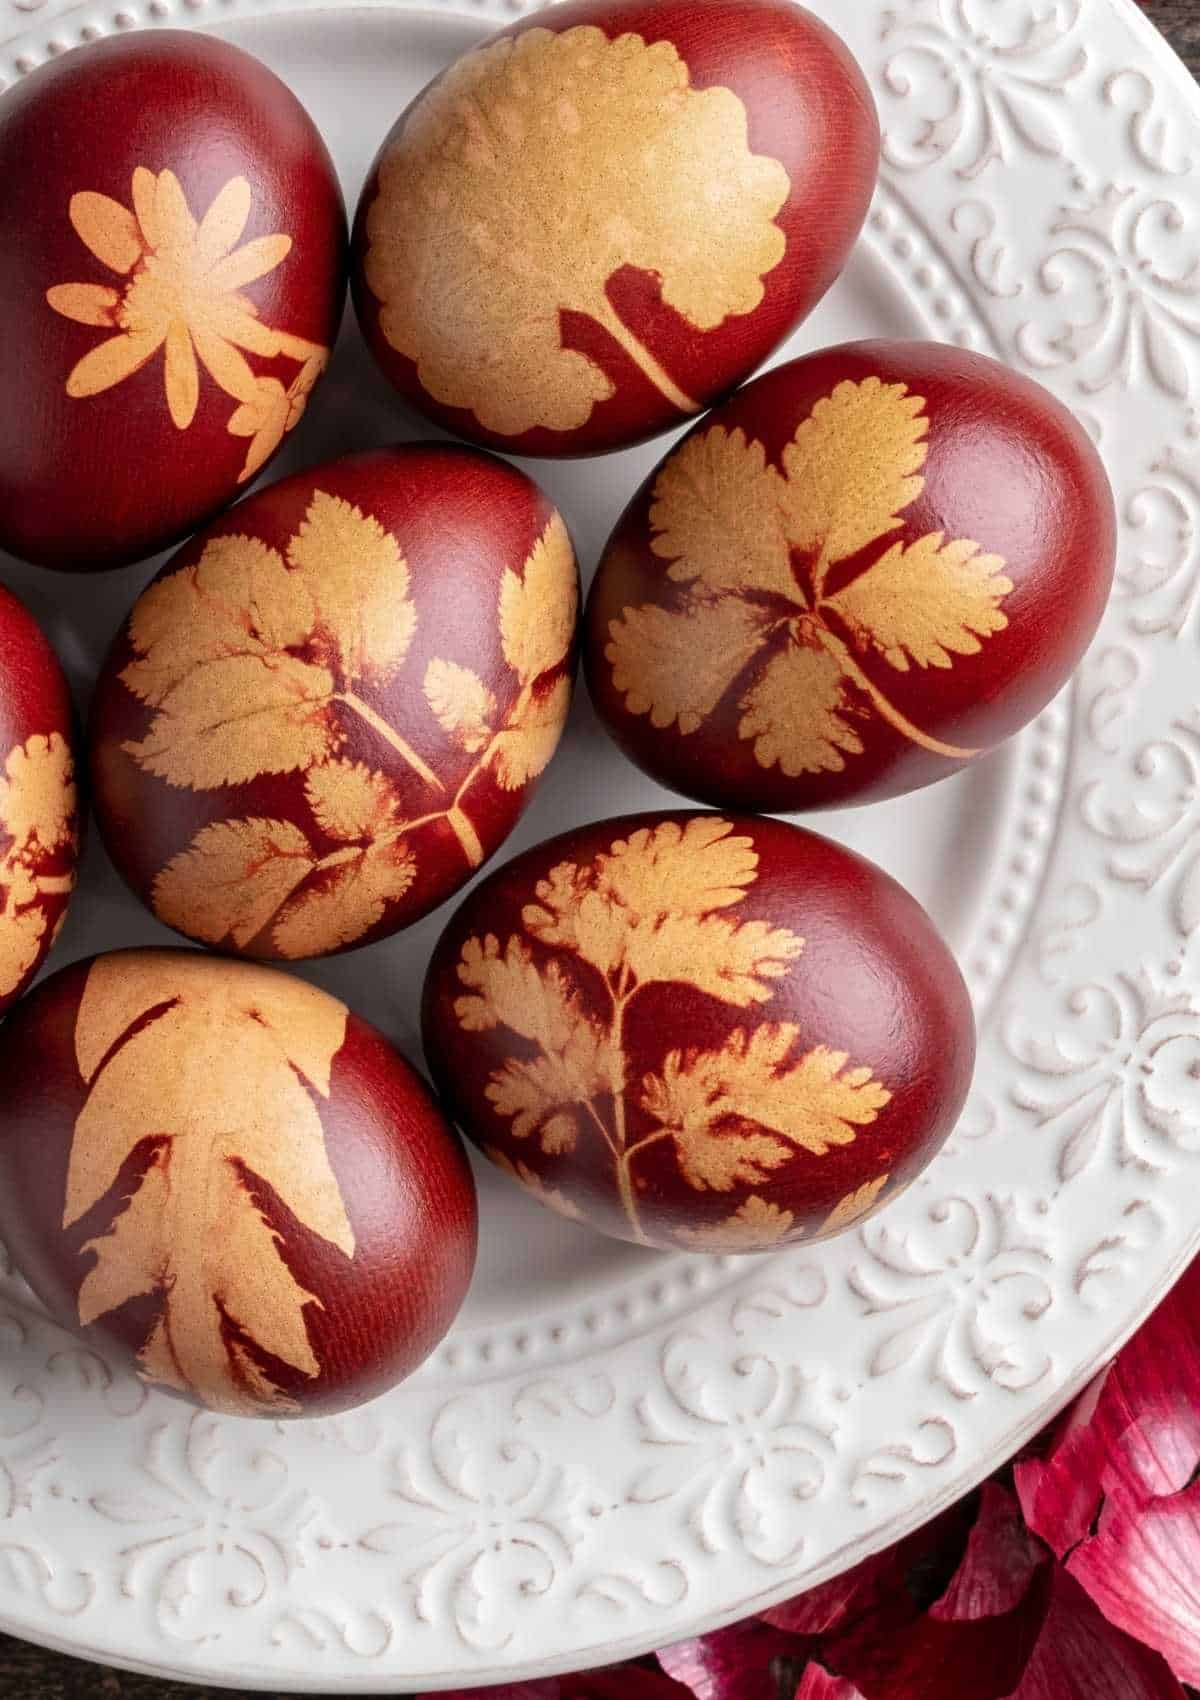 Eggs dyed with onion skins and flower petals